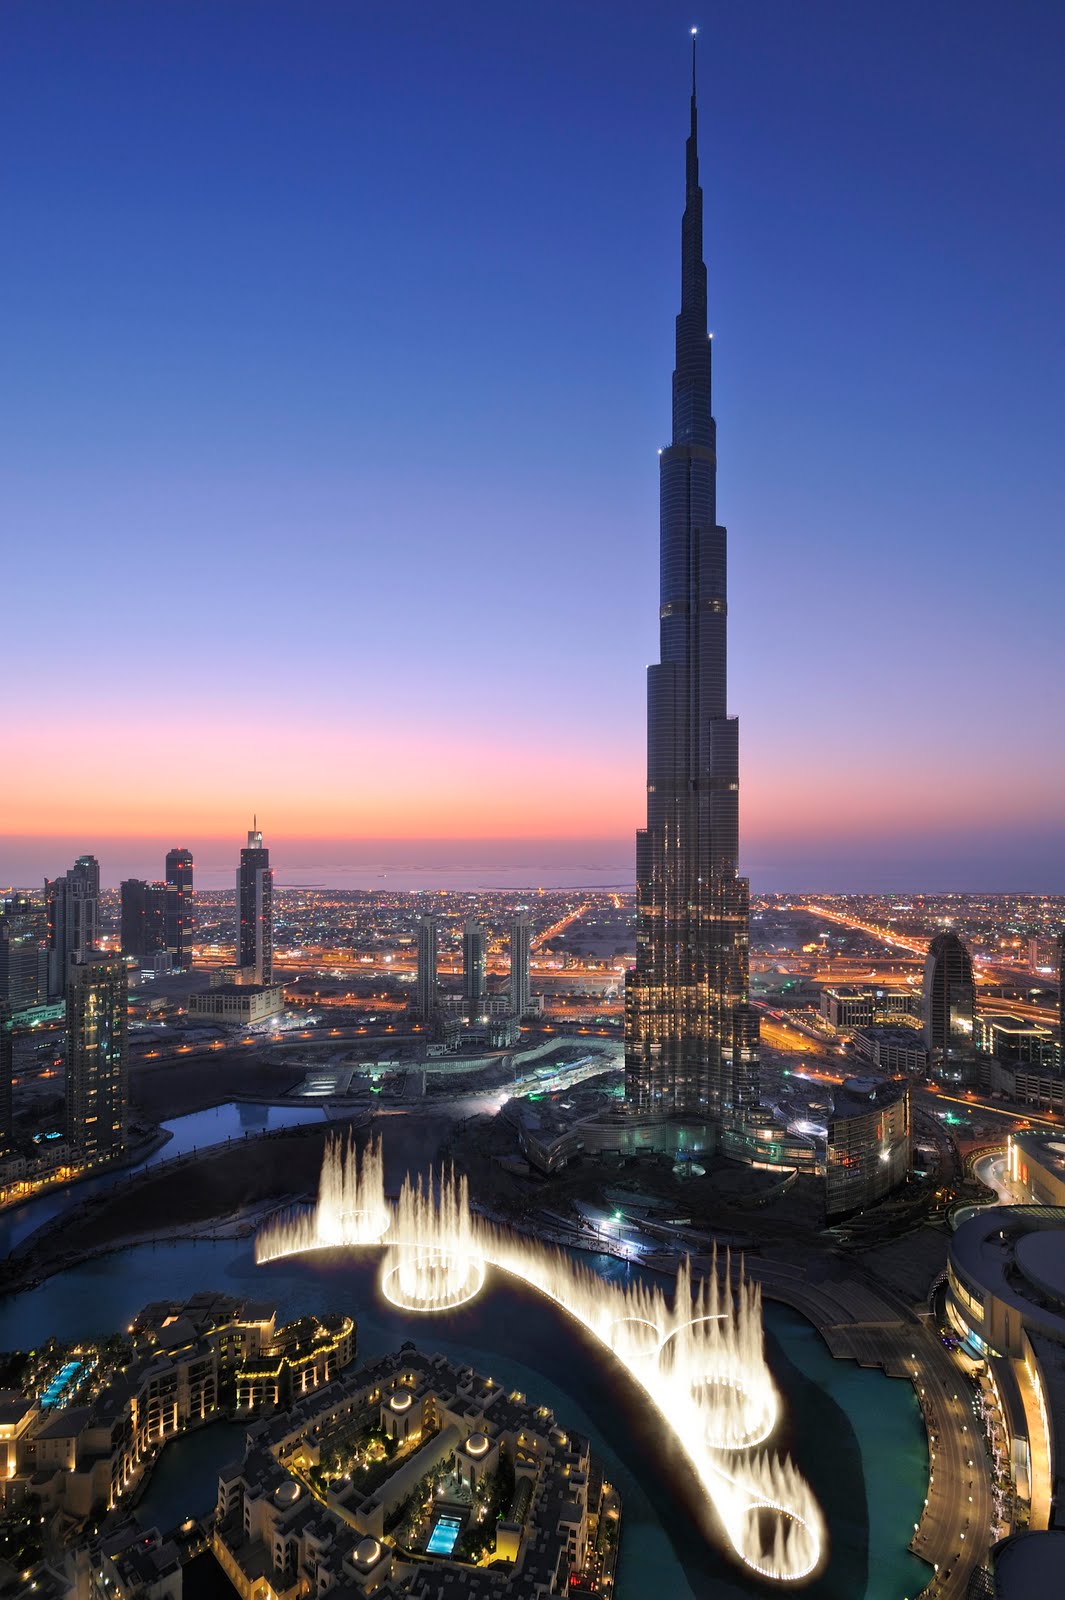 Burj Khalifa, The Tallest Man-made Structure In The World ...